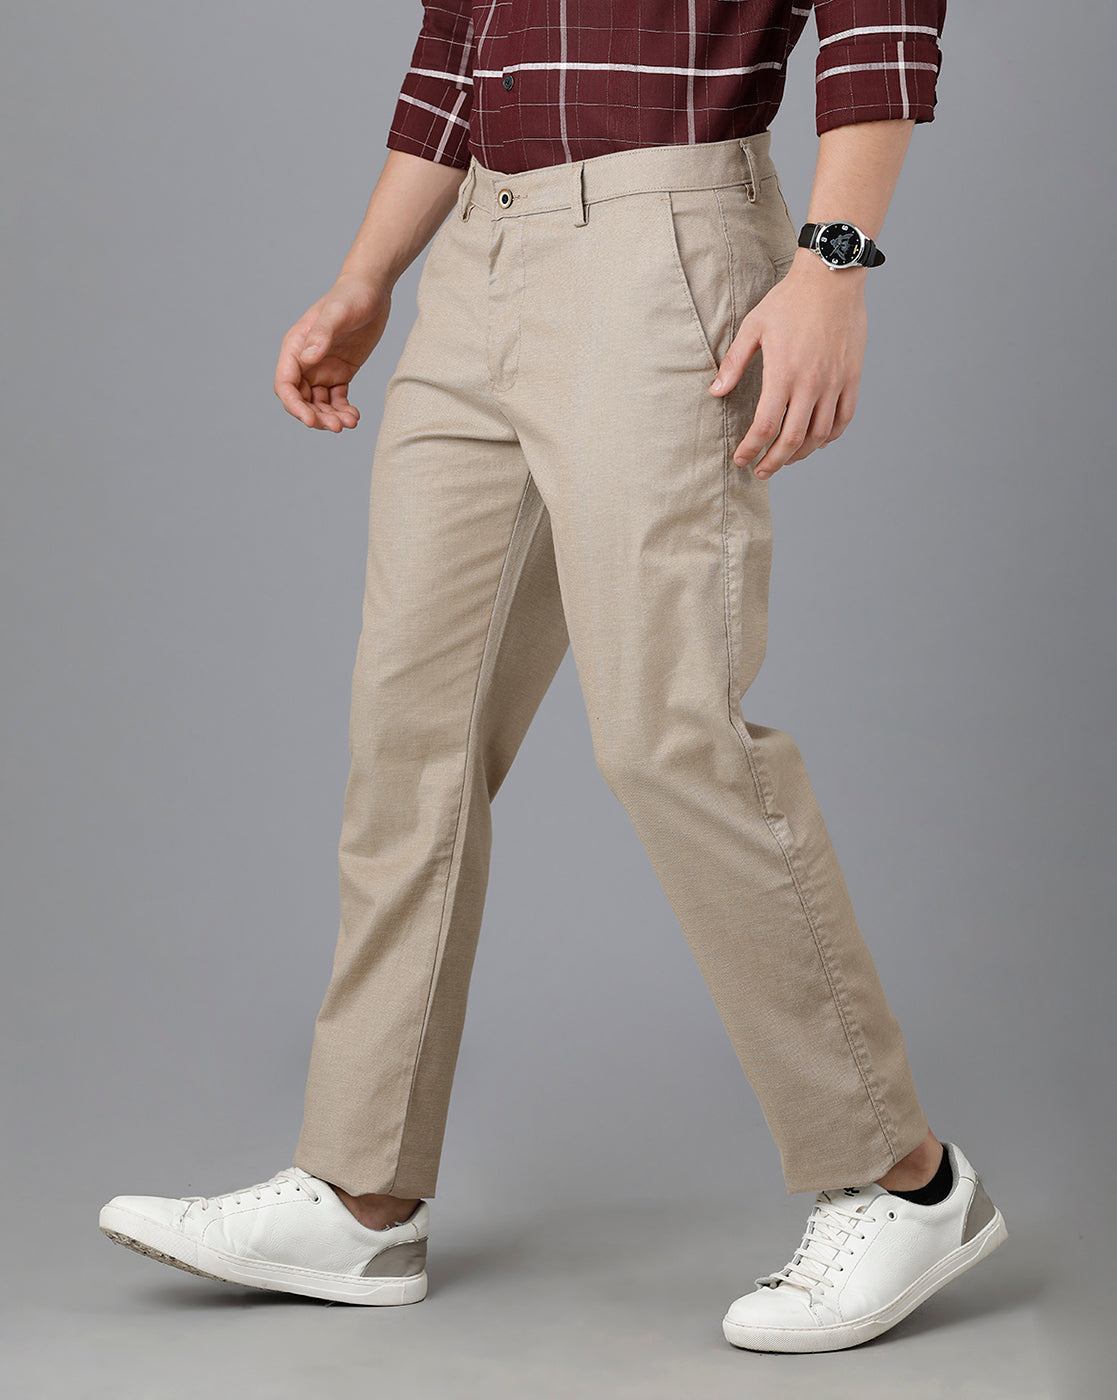 Classic Polo Men's 100% Cotton Moderate Fit Solid Ash Color Trouser |  TO1-37 A-ASH